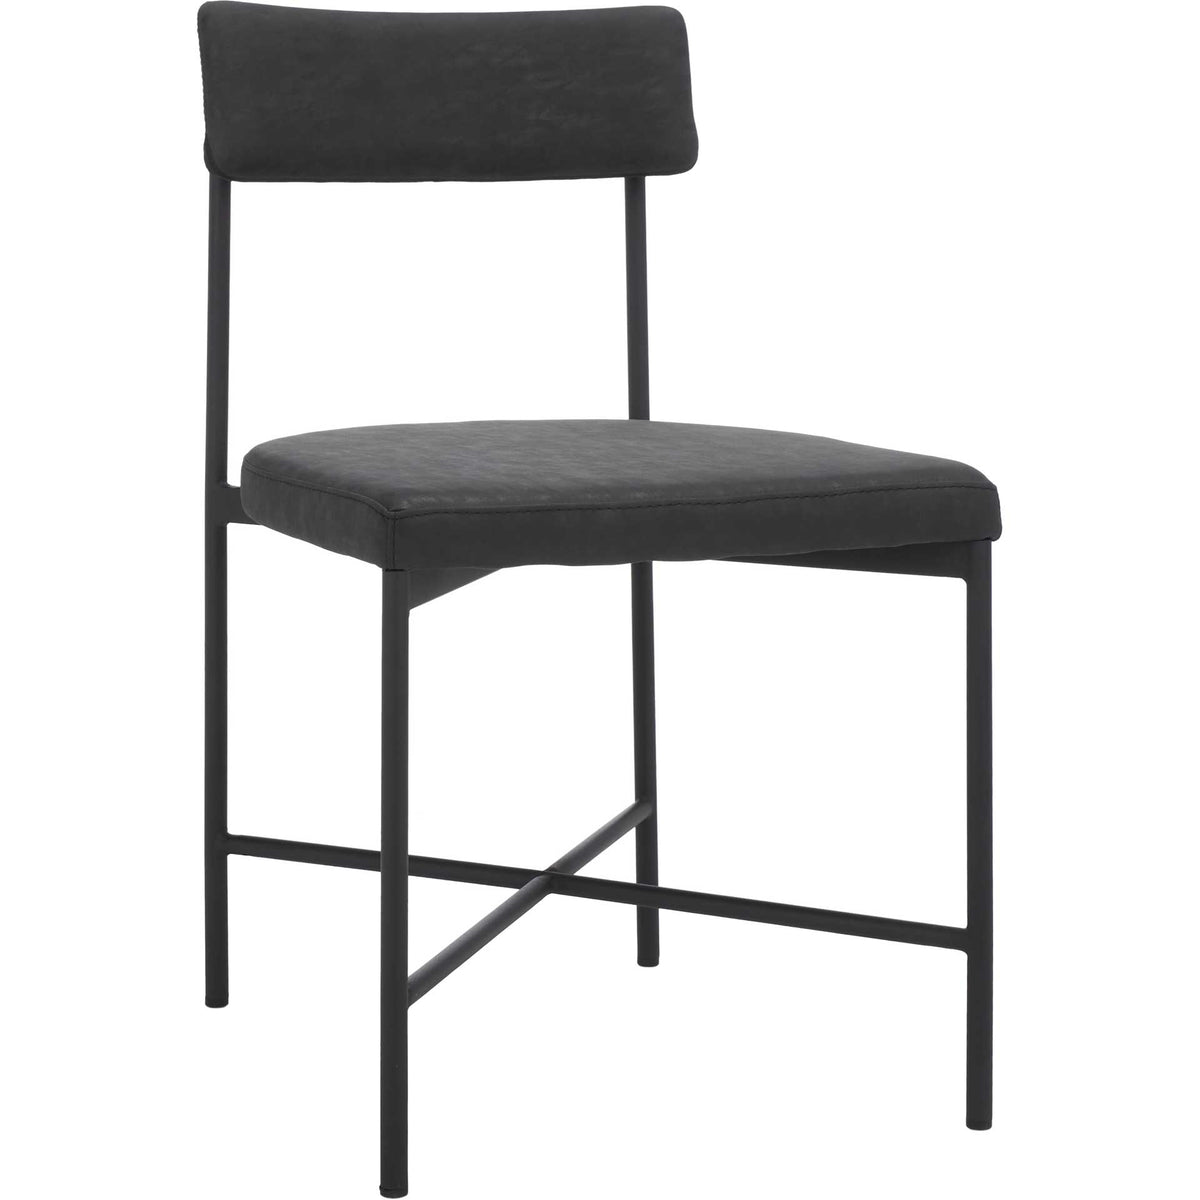 Arden Dining Chairs Black (Set of 2)